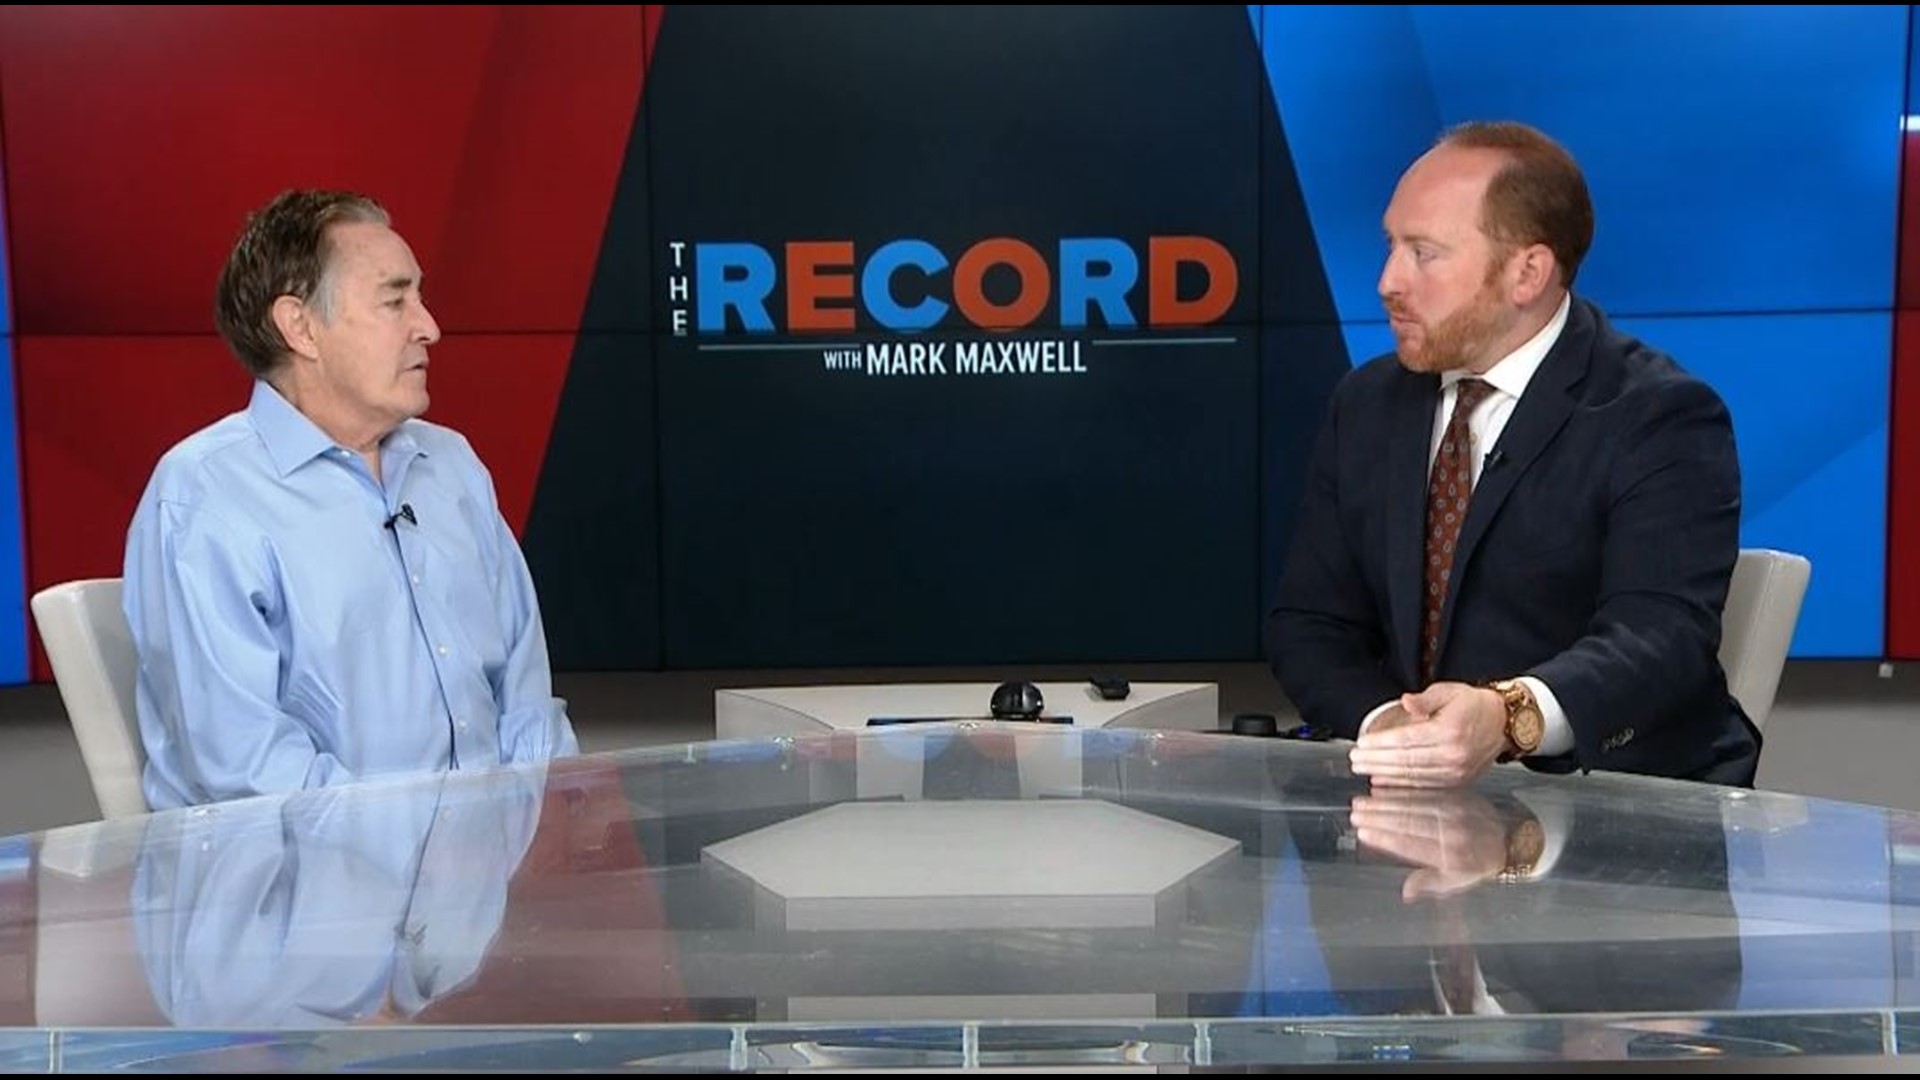 Ray Hartmann is running in the Democratic primary for Missouri Congressional district 2. He discusses his campaign with Political Editor Mark Maxwell on 'The Record.